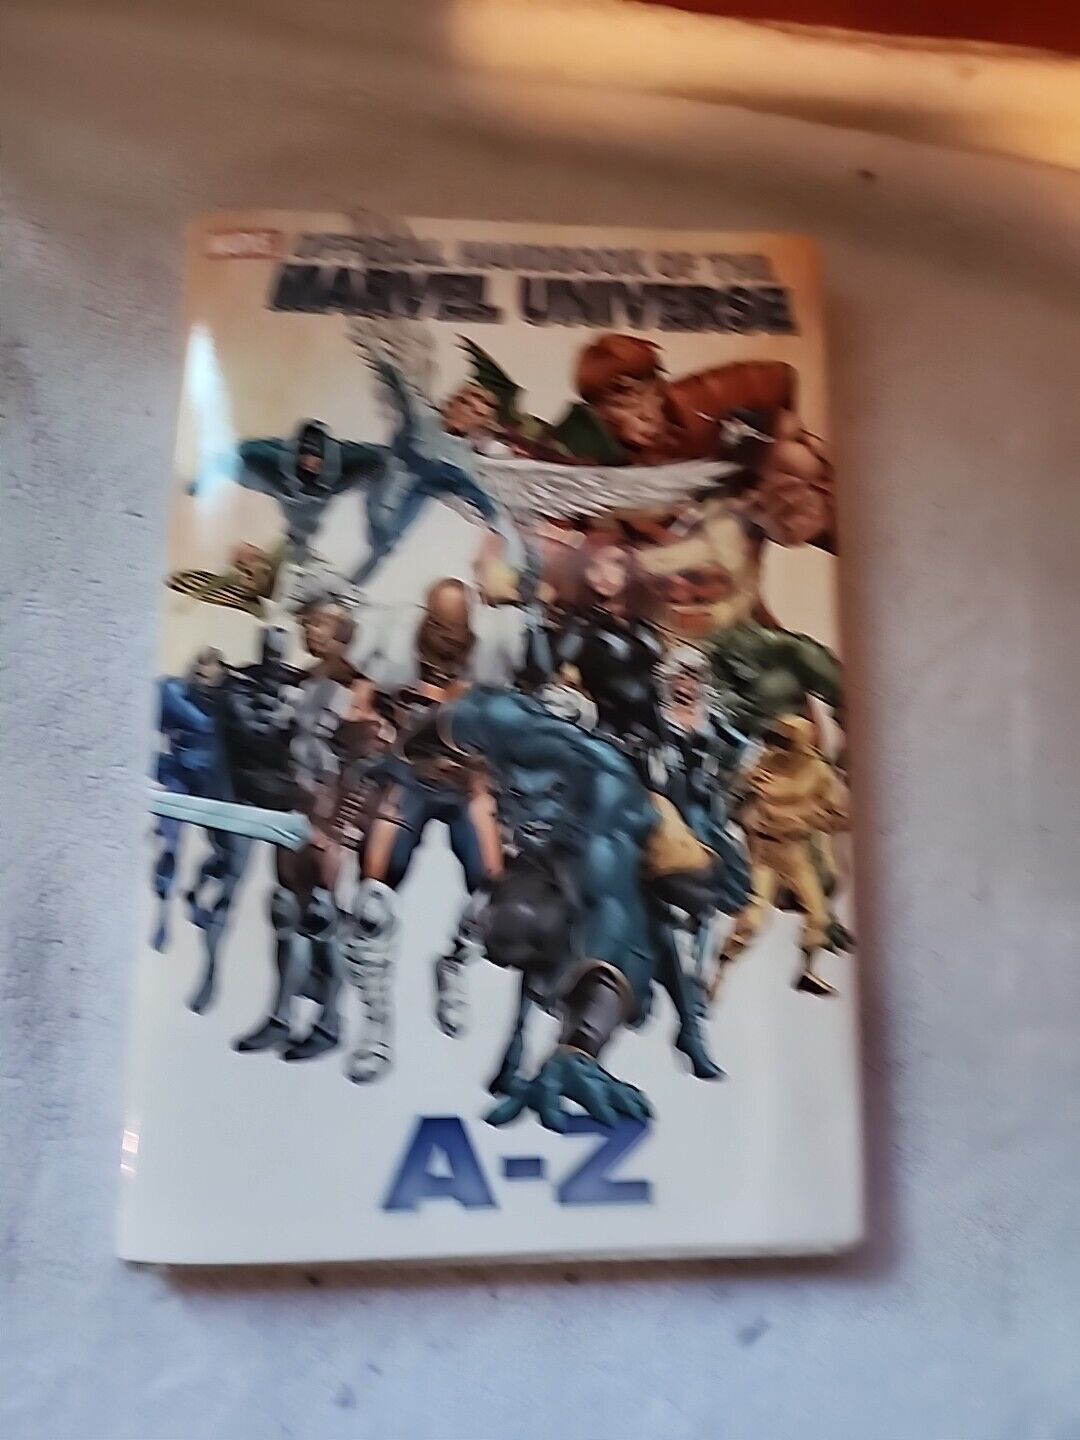 Official Handbook of the Marvel Universe A to Z #1 (Marvel, 2008)